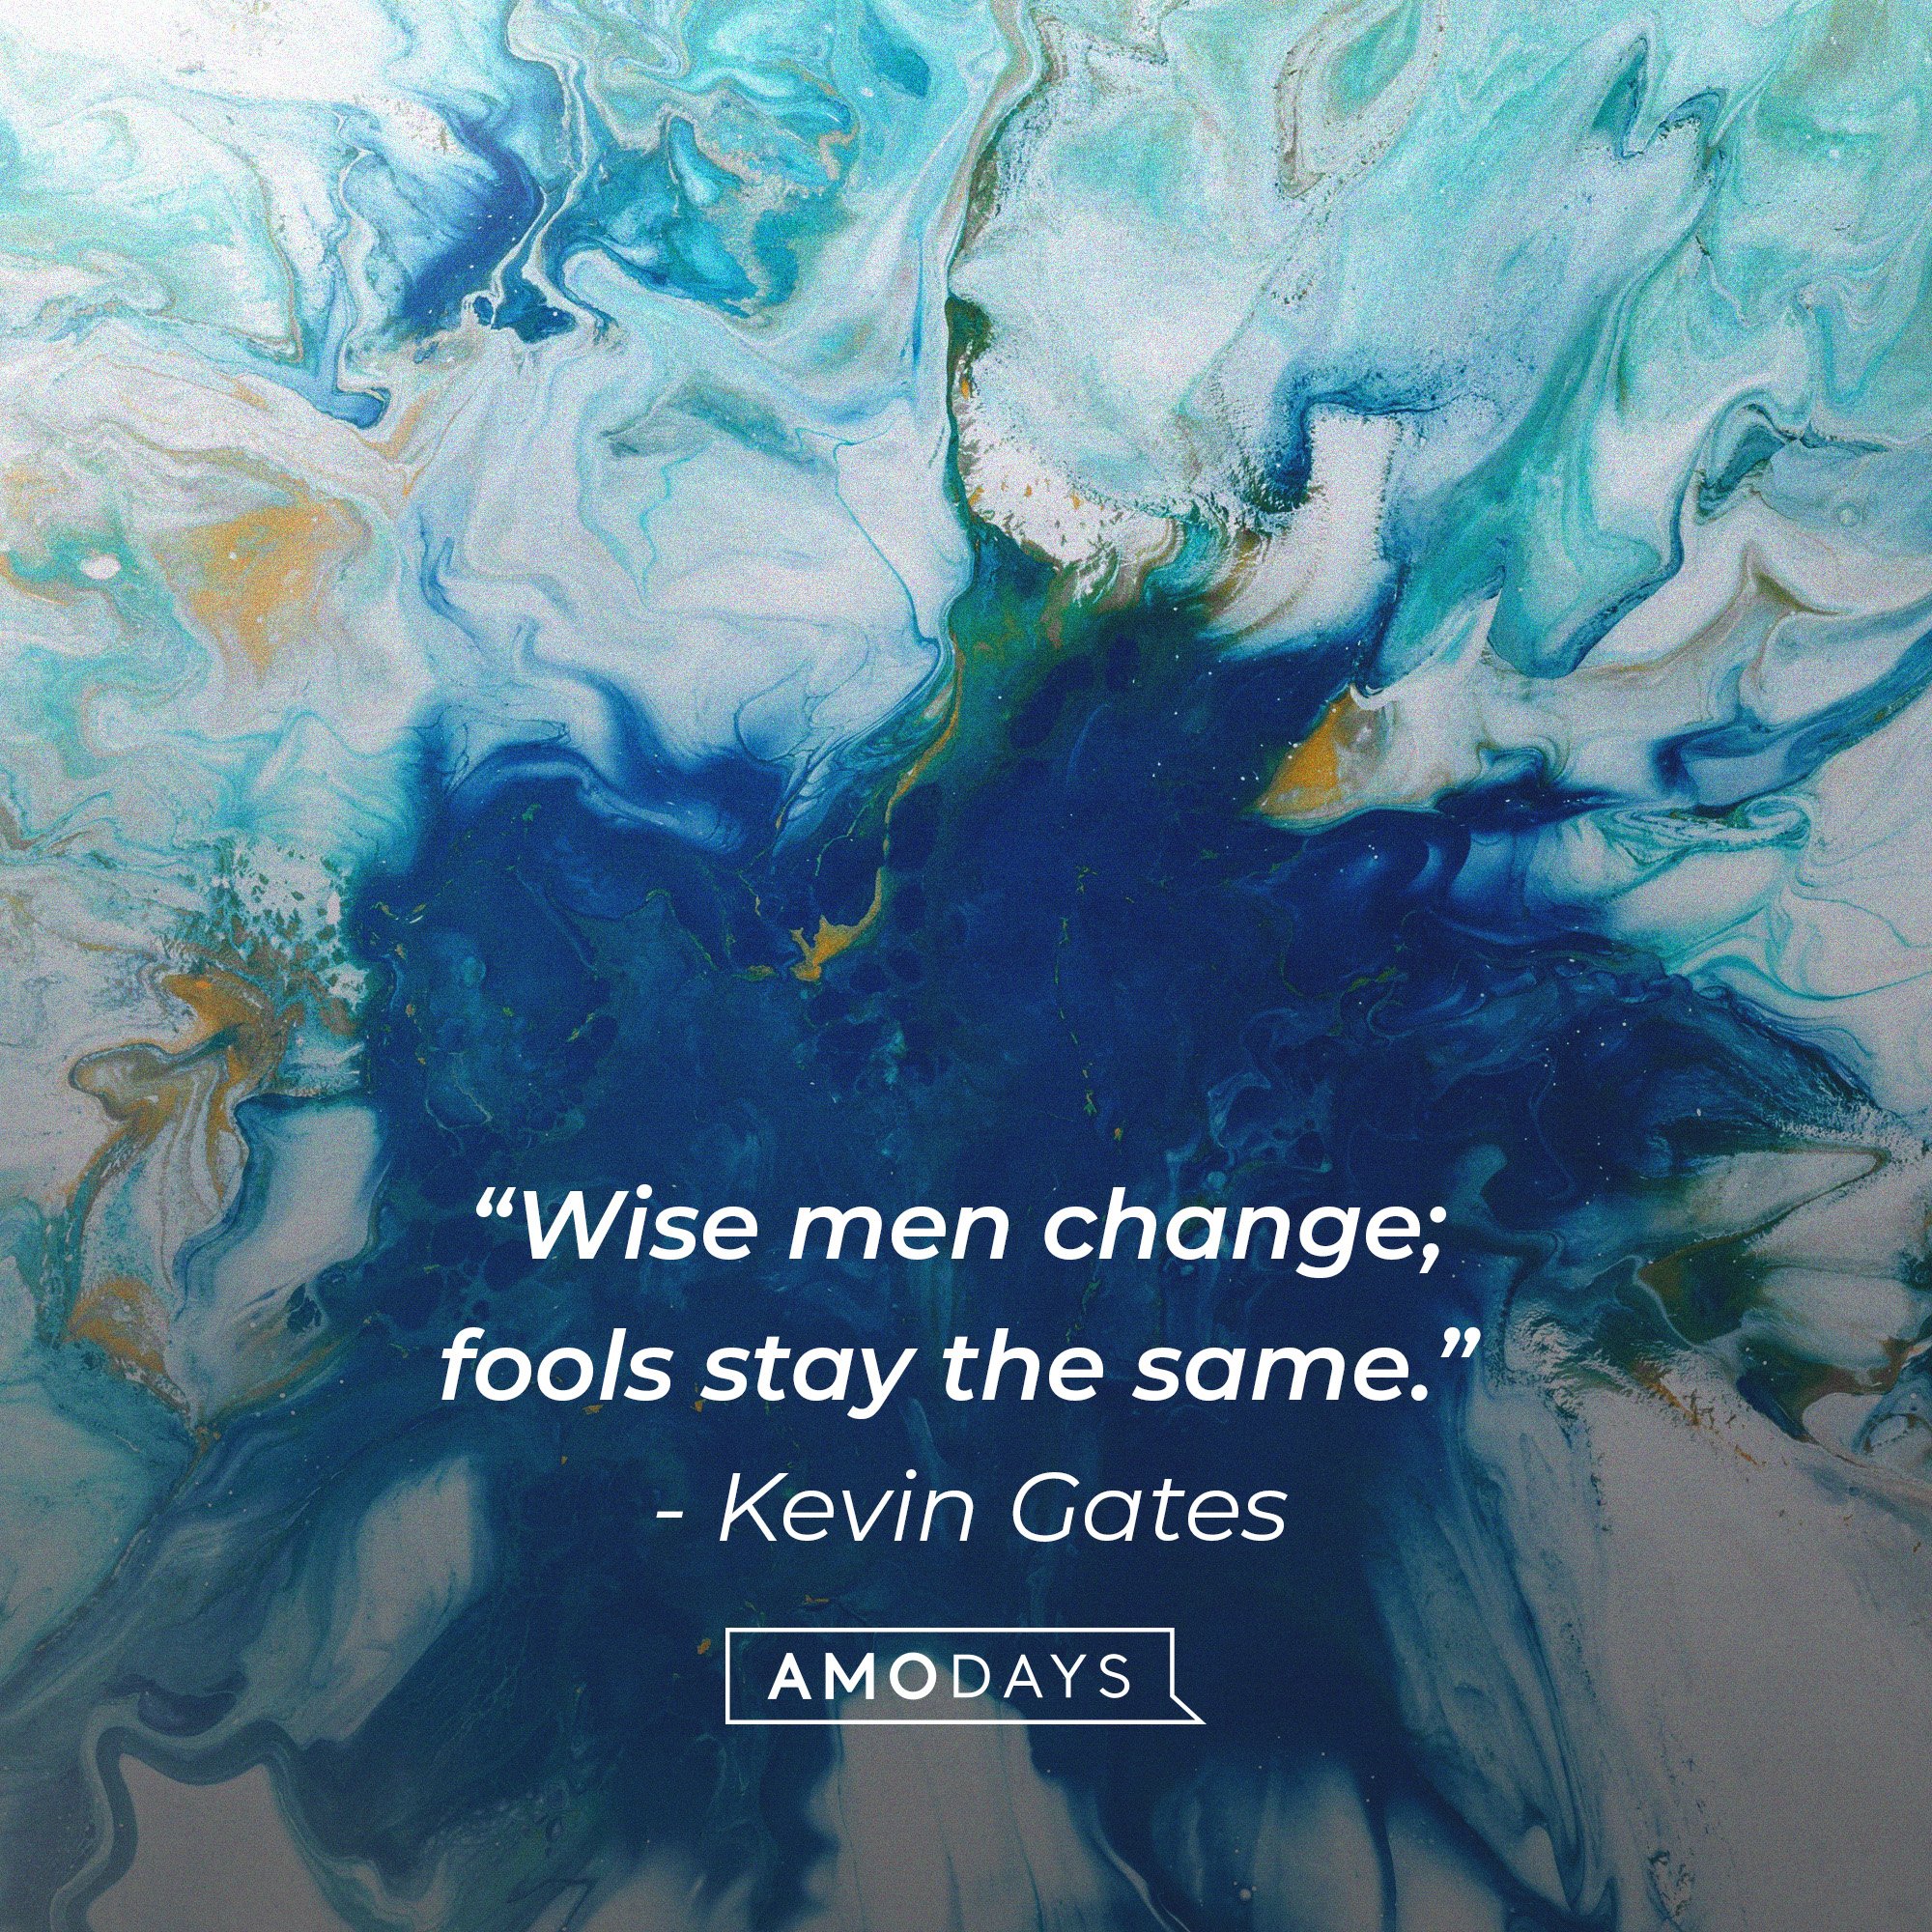 Kevin Gates’ quote: “Wise men change; fools stay the same.” | Image: AmoDays